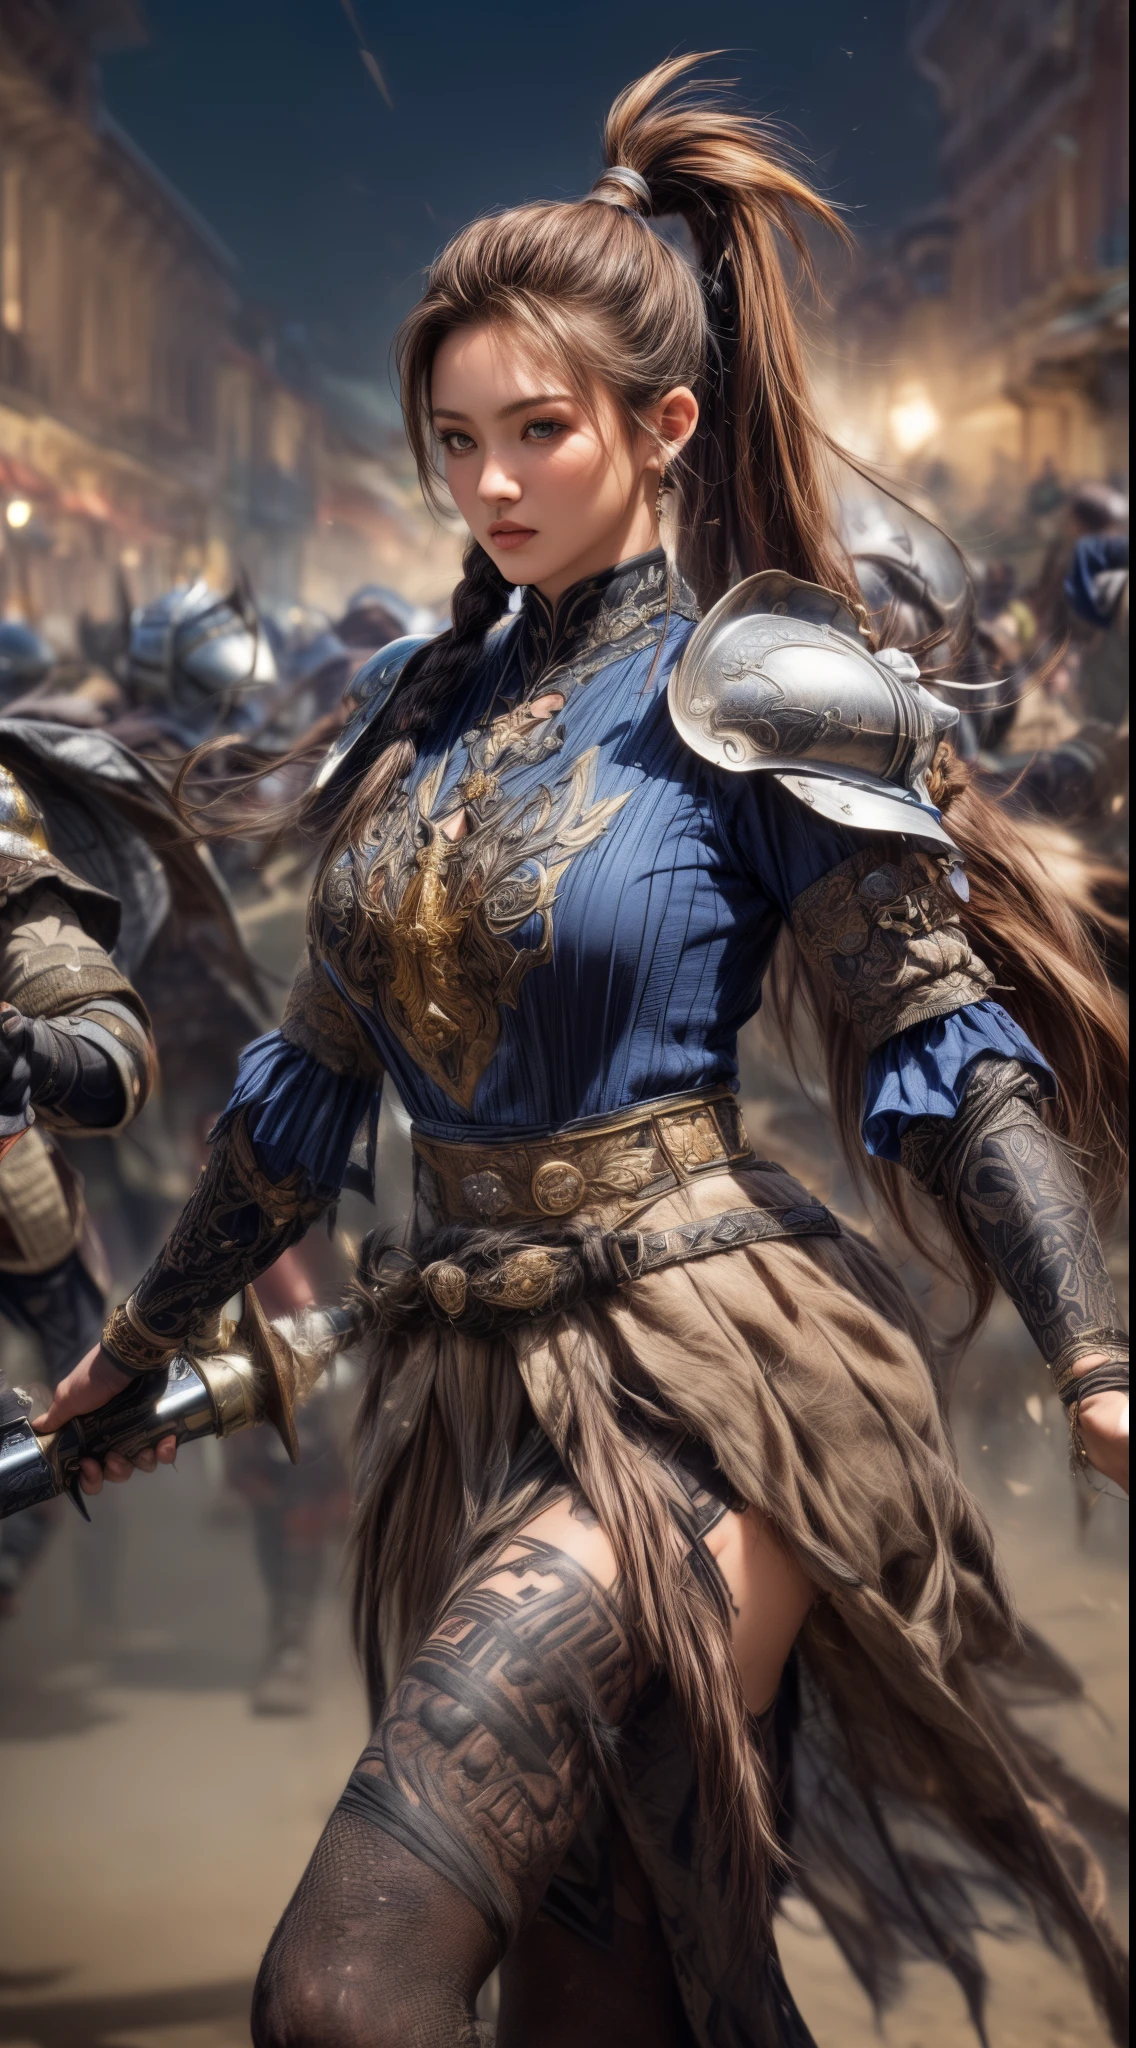 Very beautiful woman、Very tall woman、((muscle))、(Detailed face)、Realistic Skin、((Knights of the Earth)), (((Light brown and black armor:1.25)))、((((Very delicate and decorated light brown and black armor))))、((Delicate photo))，(Girl Astepeace RAW Photo Details:1.25), (highest quality:1.6), (超A high resolution:1.5), (Realistic:1.75), 8K resolution, Canon EOS R5, 50mm, absurdes, Ultra-detailed,Cinema Lighting,Battlefields of Medieval Europe、((battle))、RPG World、Final Fantasy、(((Embellished skirt)))、Thigh-high socks、Shin Guards、night、((((Messy center parted high ponytail))))、((Get six-pack))、Torn Cloak、((Beautiful Armor))、(((Huge weapons)))、In combat、The wind is blowing、(((Leading a large group of knights:1.3)))、(((Knight Commander)))、(Banner)、Great Ape Emblem、(((Light brown as the main color)))、(((black tribal tattoo)))、Dust、(Wearing fur)、(Rocky area)